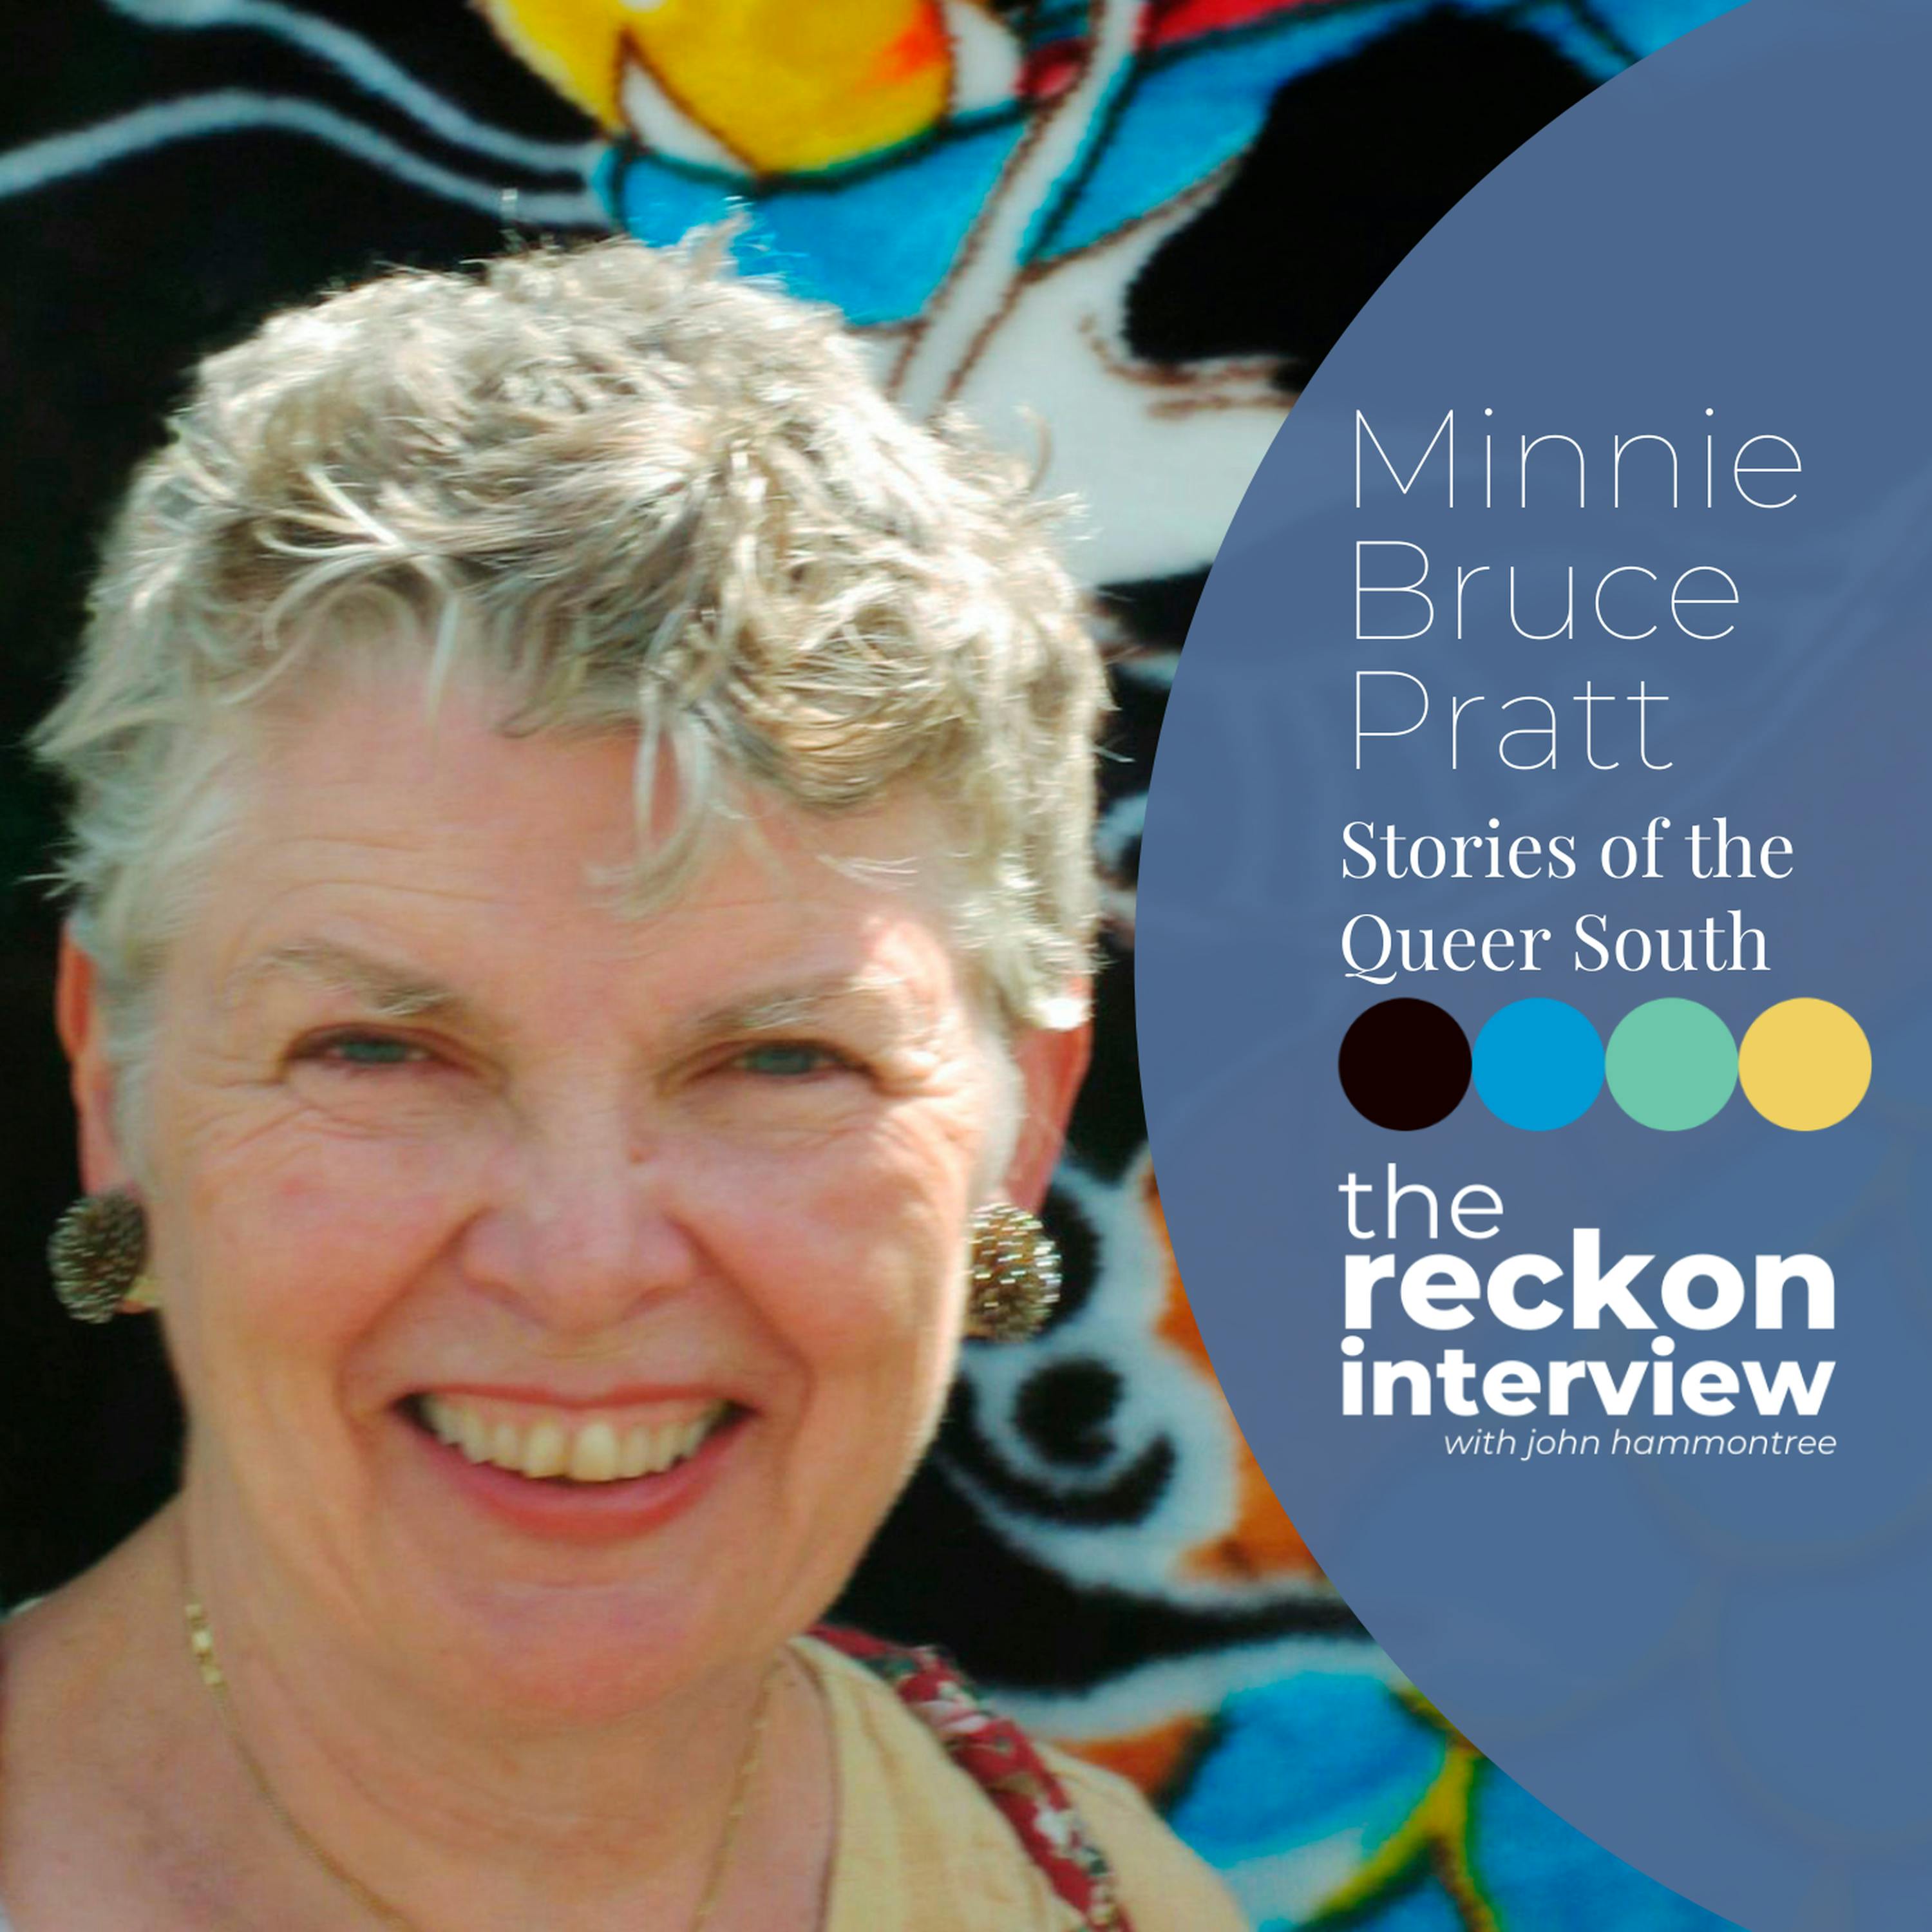 Minnie Bruce Pratt on the past, present and future of the Queer South